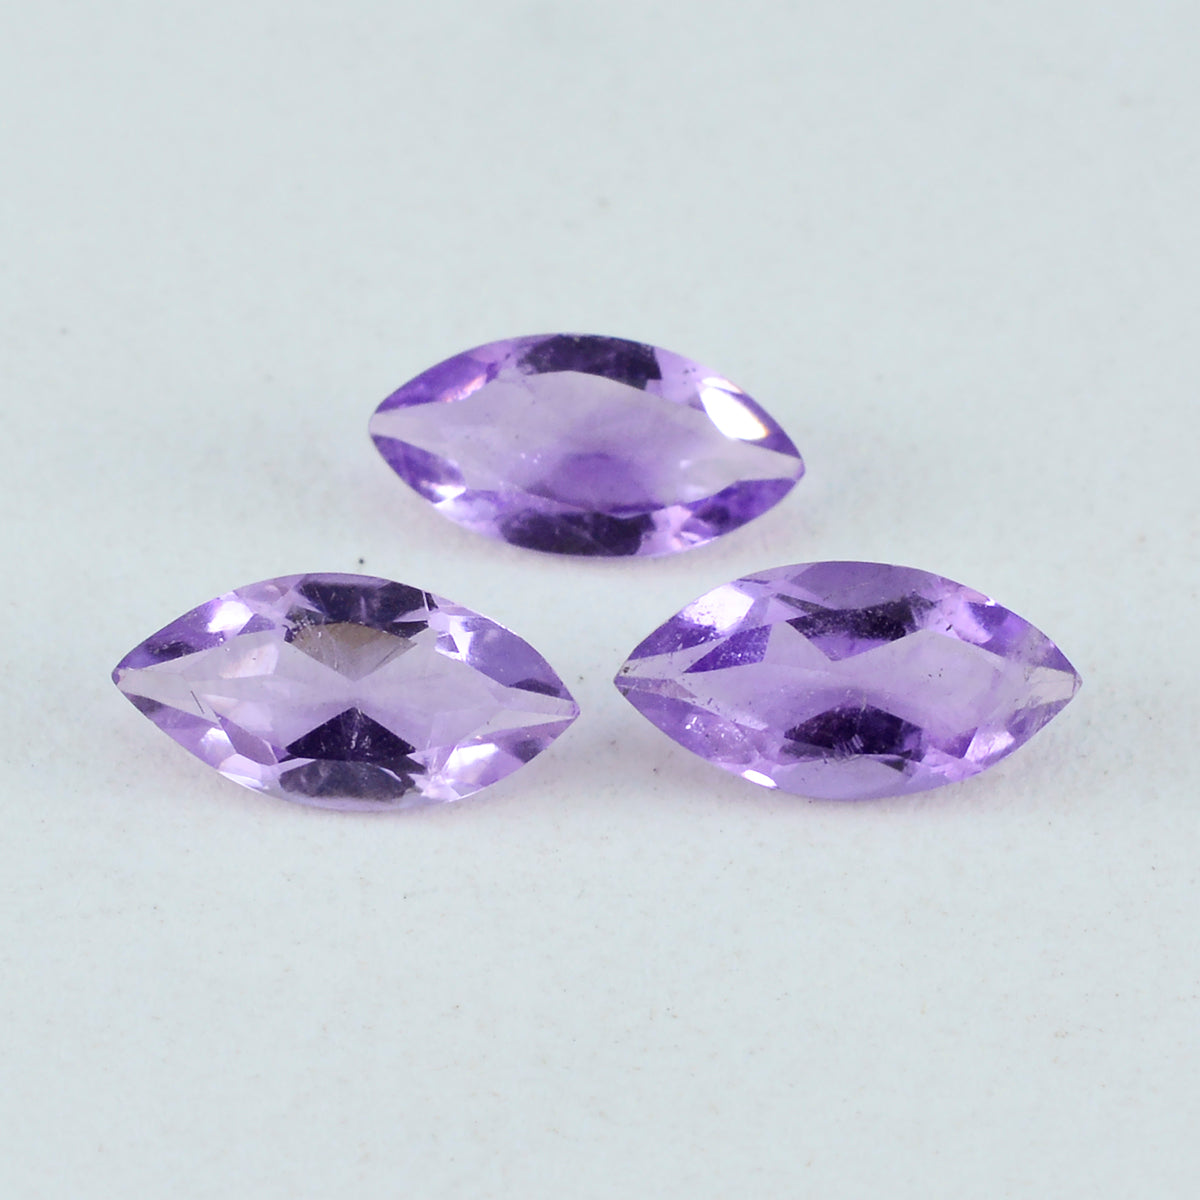 Riyogems 1PC Natural Purple Amethyst Faceted 8x16 mm Marquise Shape amazing Quality Stone